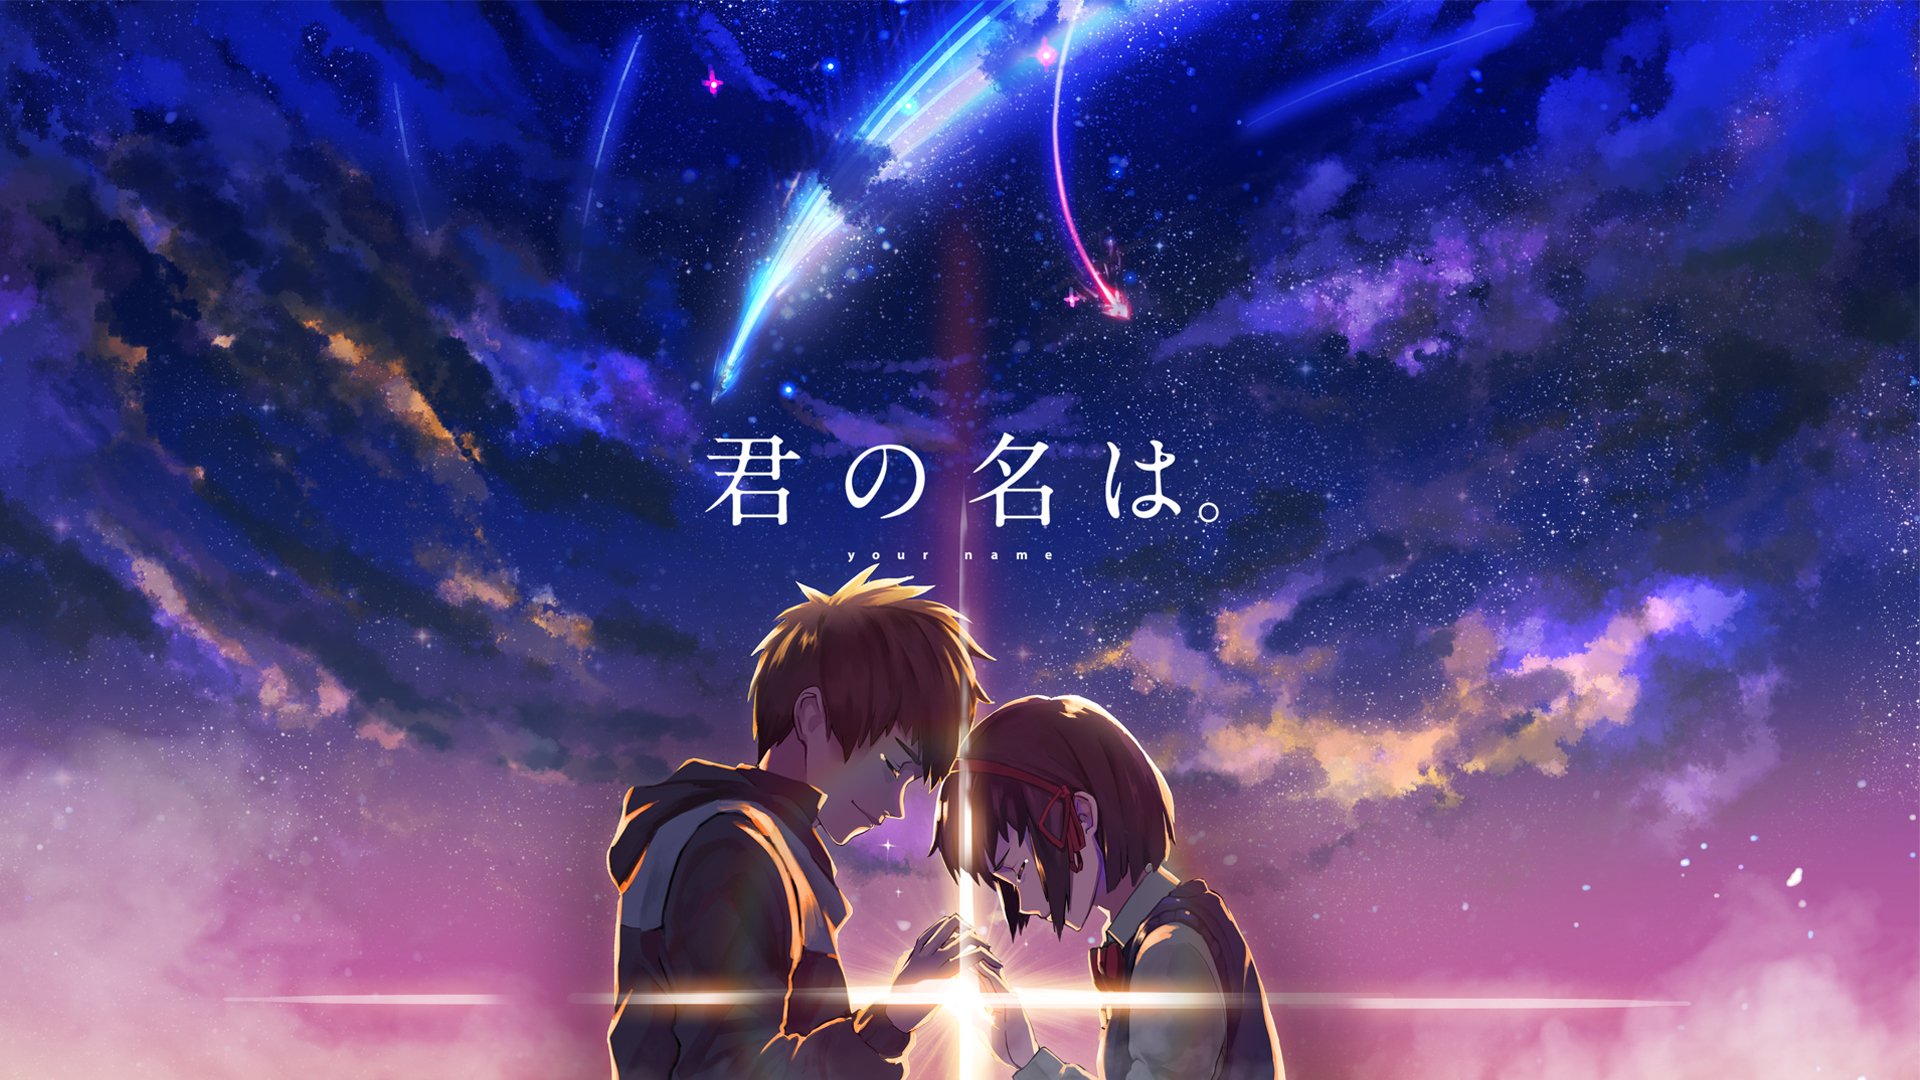  Your  Name  HD Wallpaper  Background  Image 1920x1080 